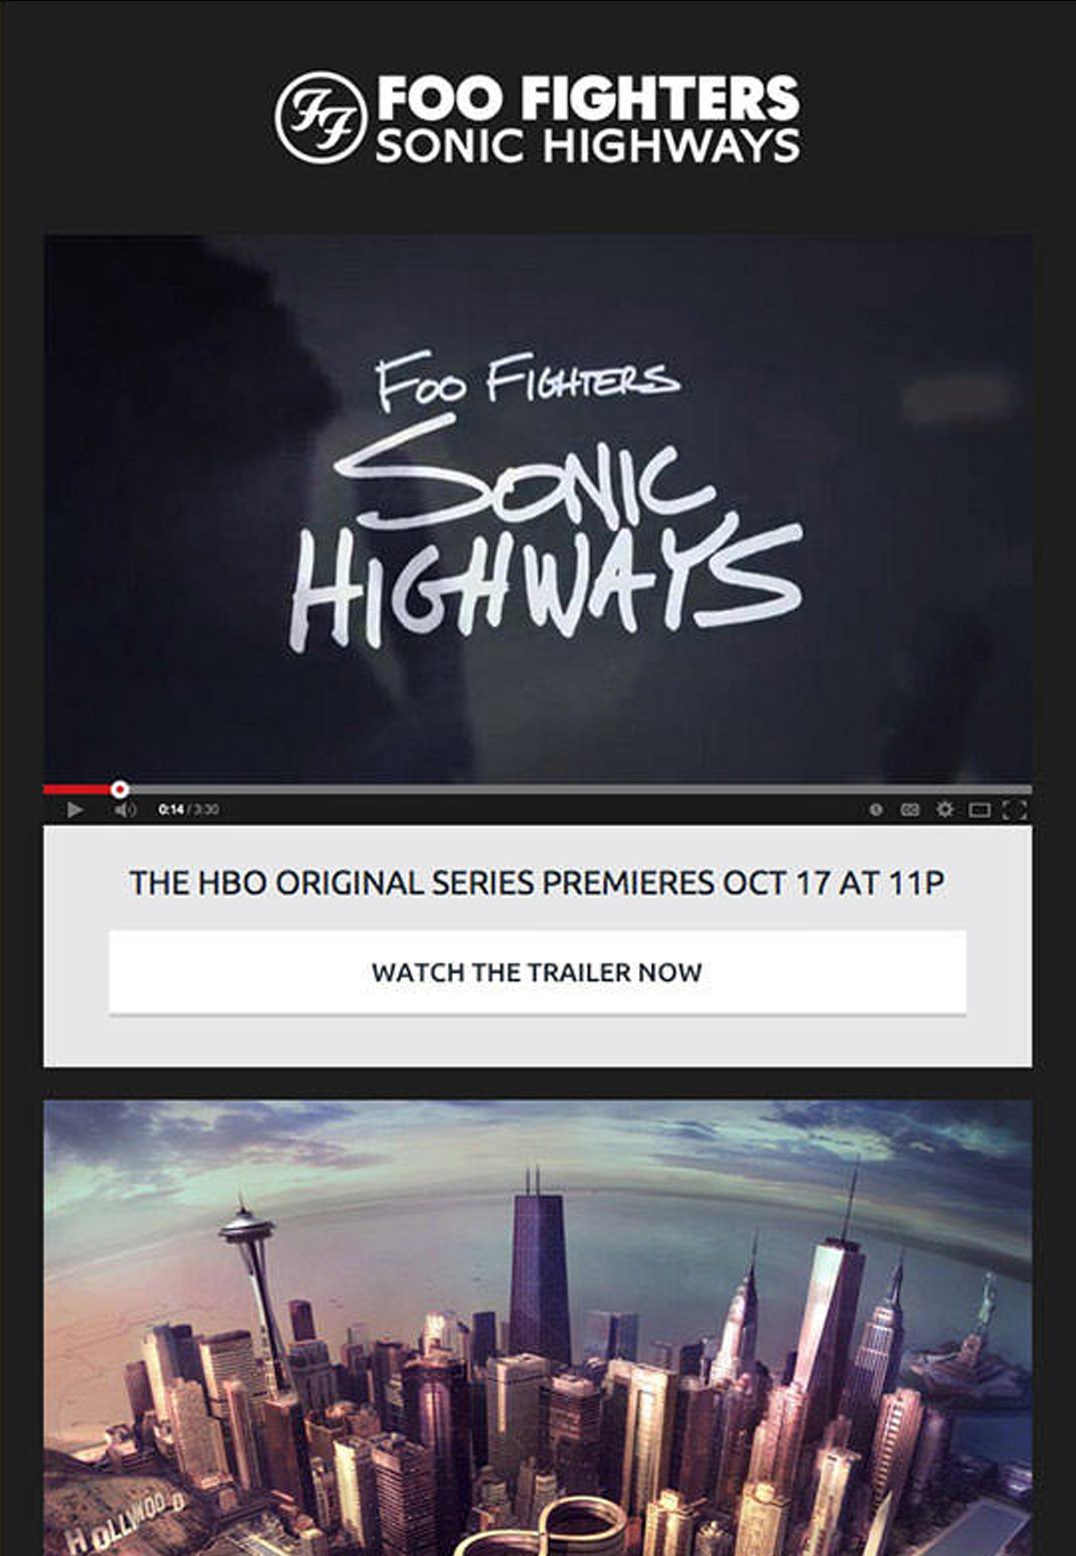 Foo Fighters is an American rock band with a thriving following. When they wanted to get the word out about their new album and HBO special, ‘Sonic Highways’, they turned to video email marketing.